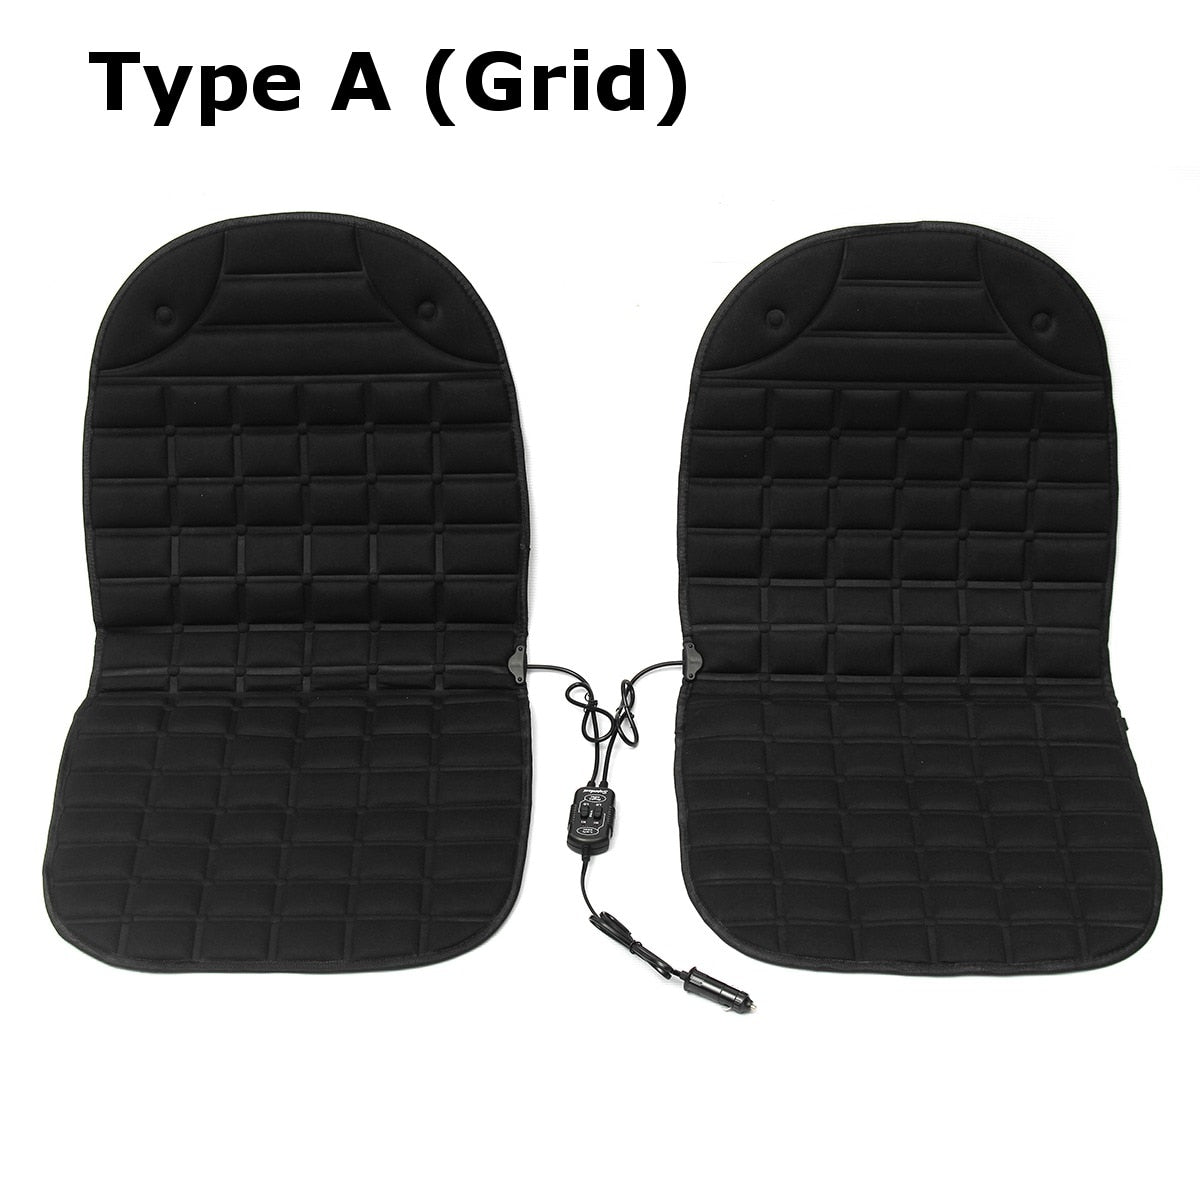 Tohuu Heated Car Seat Cover 12V Heating Car Seat Cushion Electric Winter Seat  Cushion for Car Comfort Heated Seat Cover with Fast Heat for Cold Days  clever 